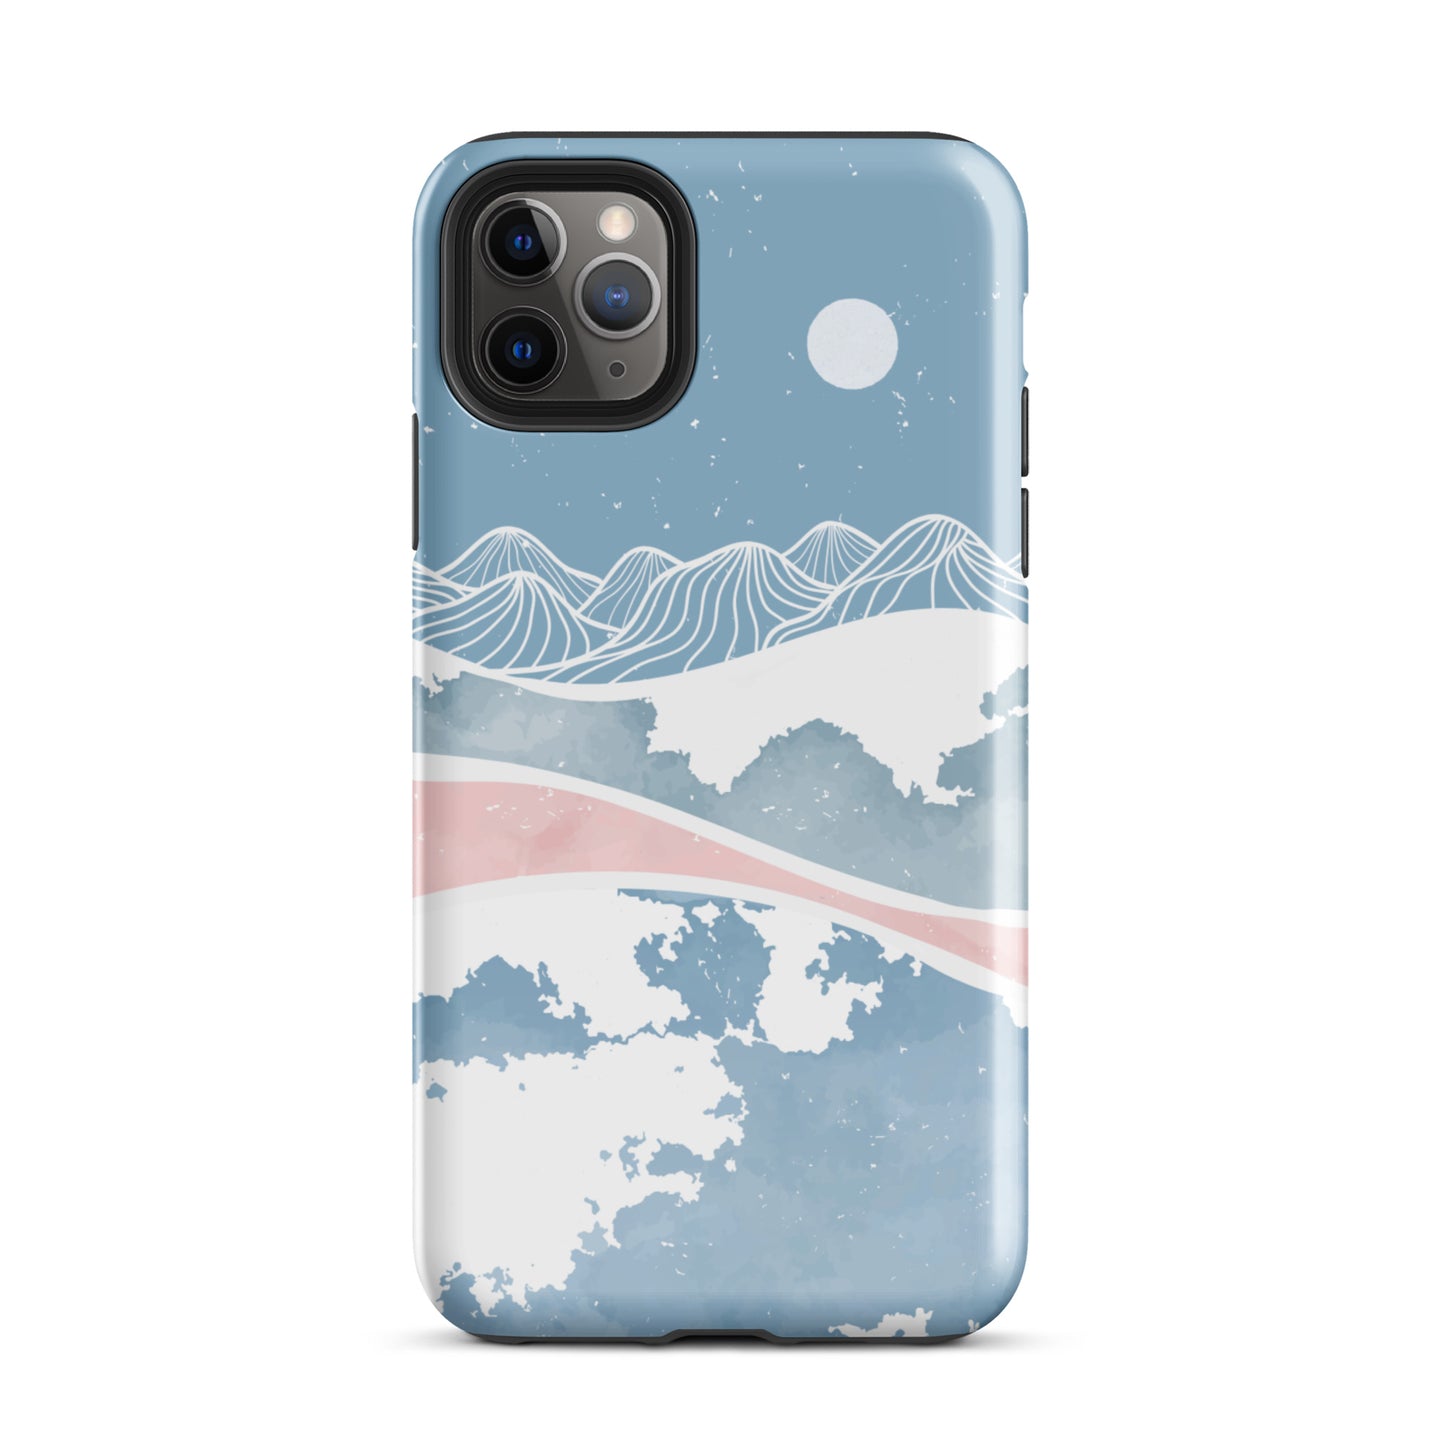 Blue Winter Night iPhone Case iPhone 11 Pro Max Glossy